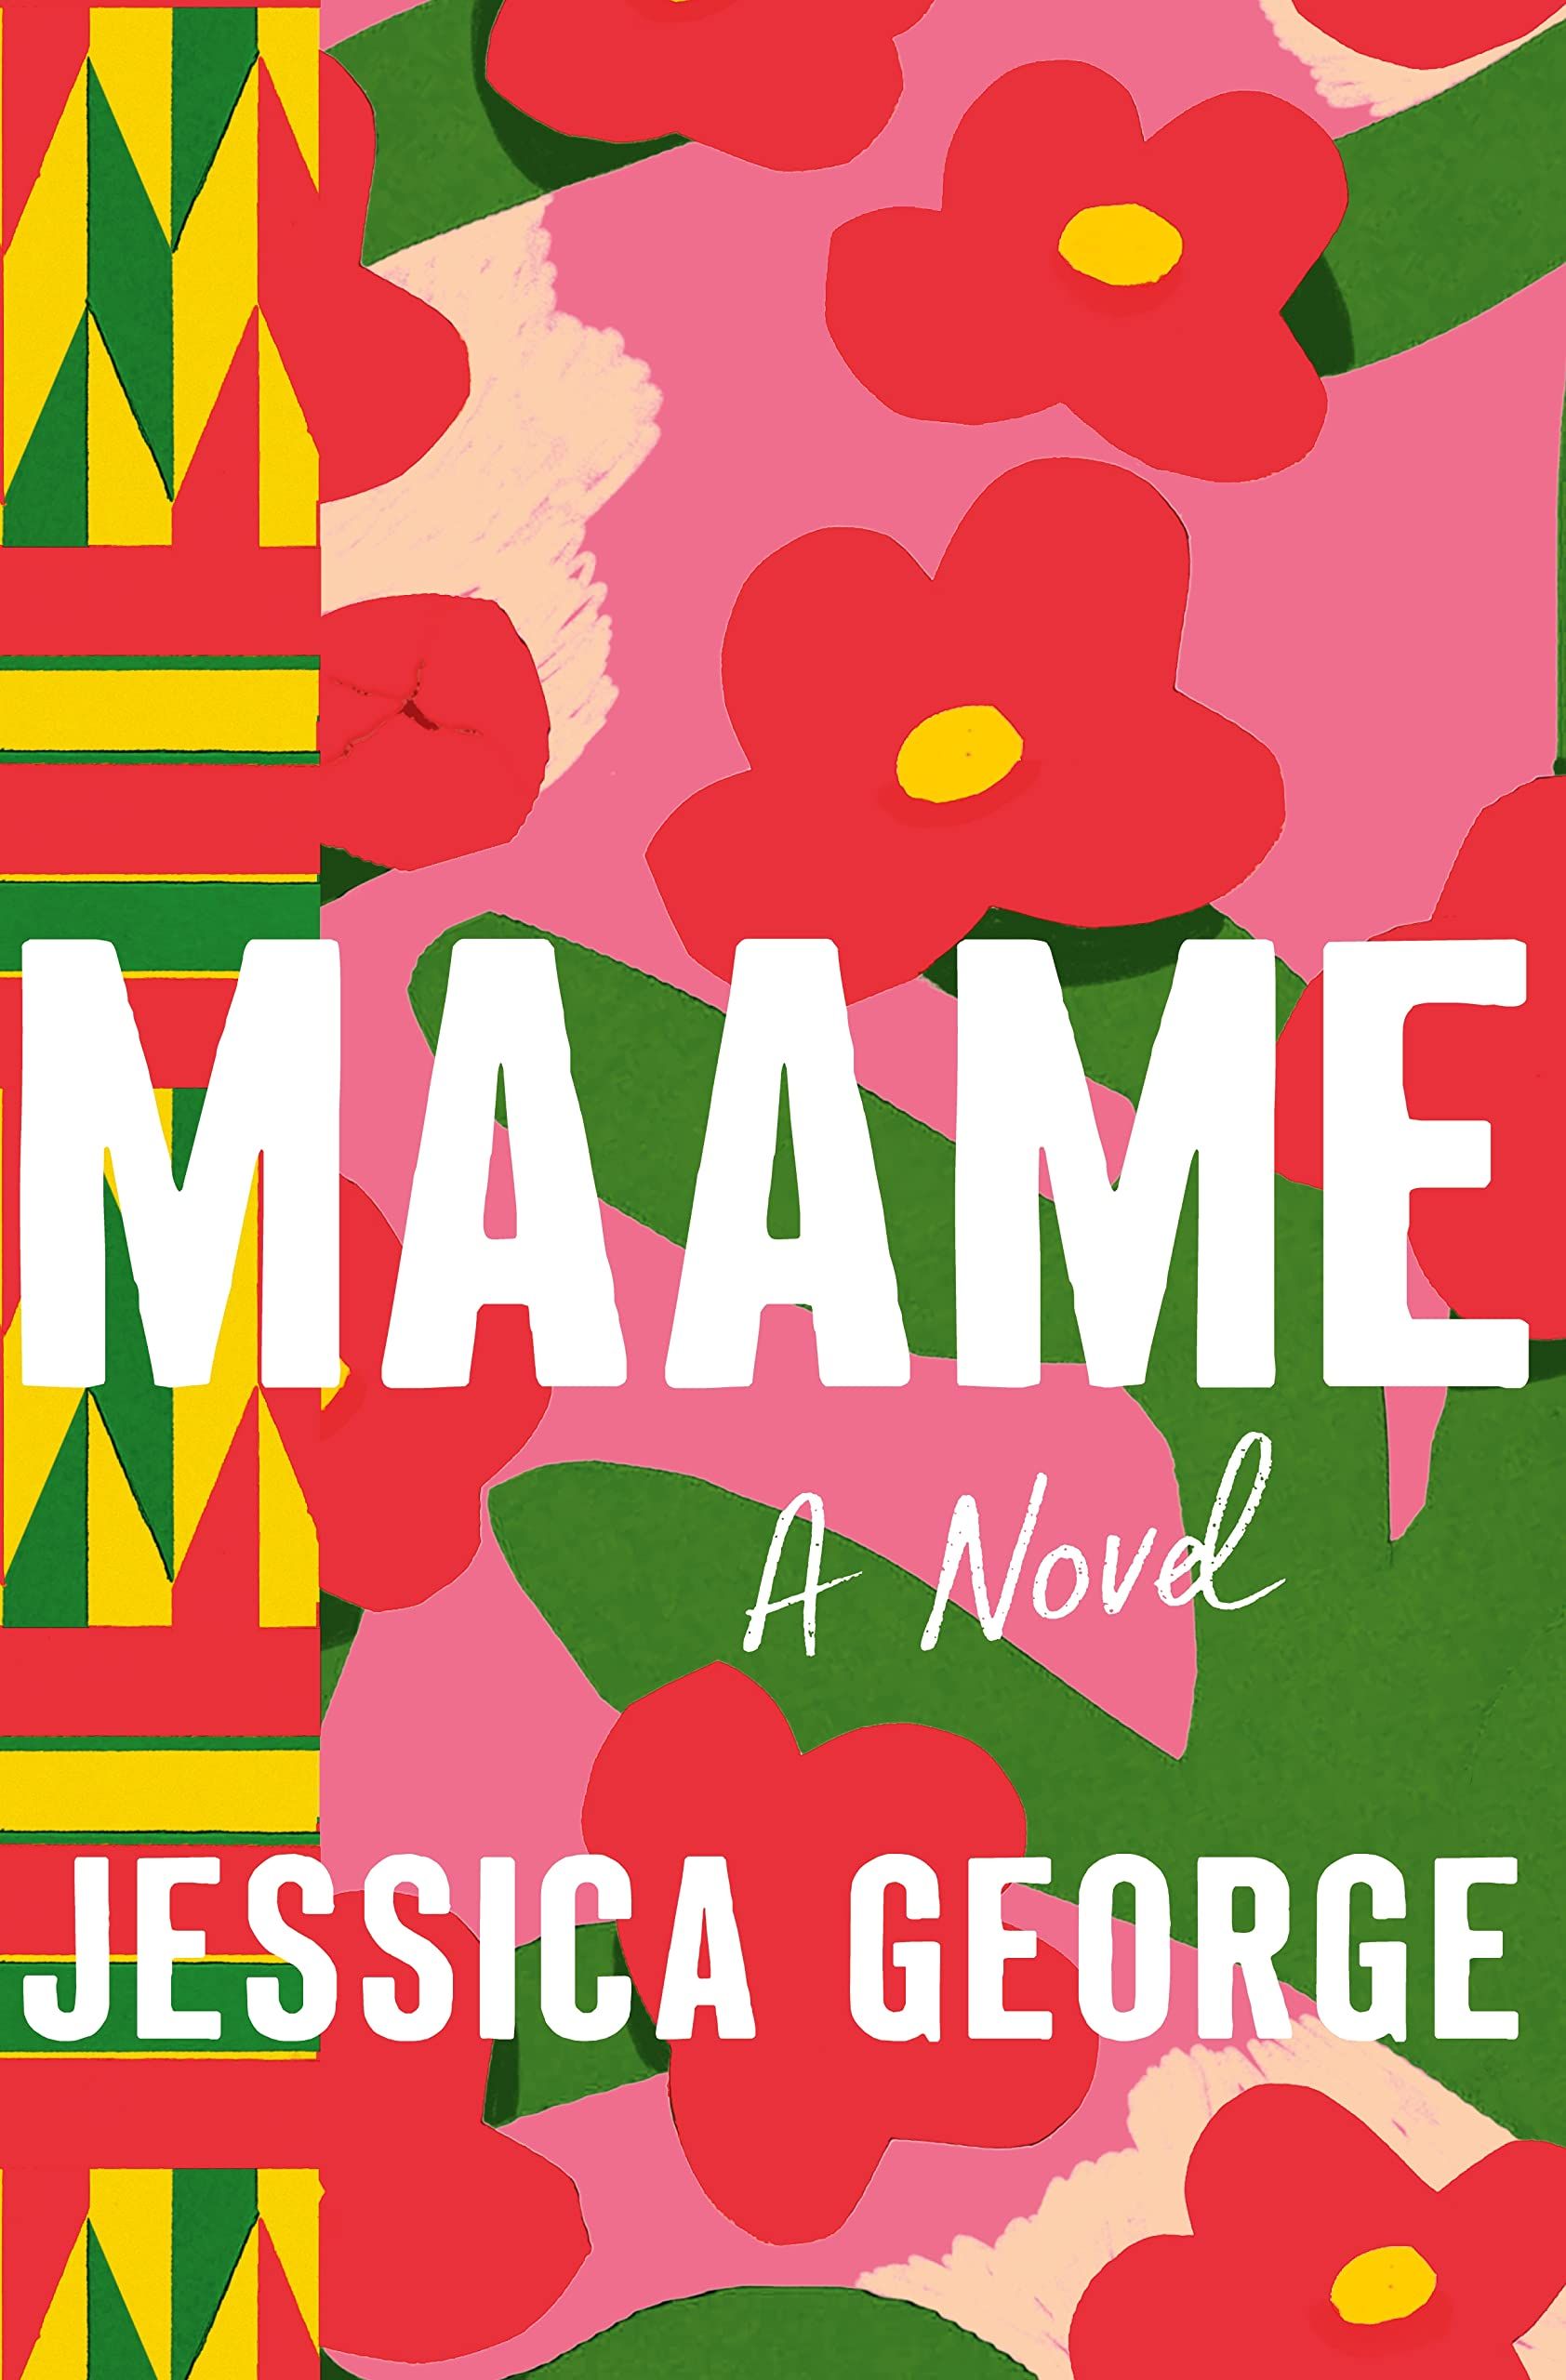 Maame by Jessica George book cover